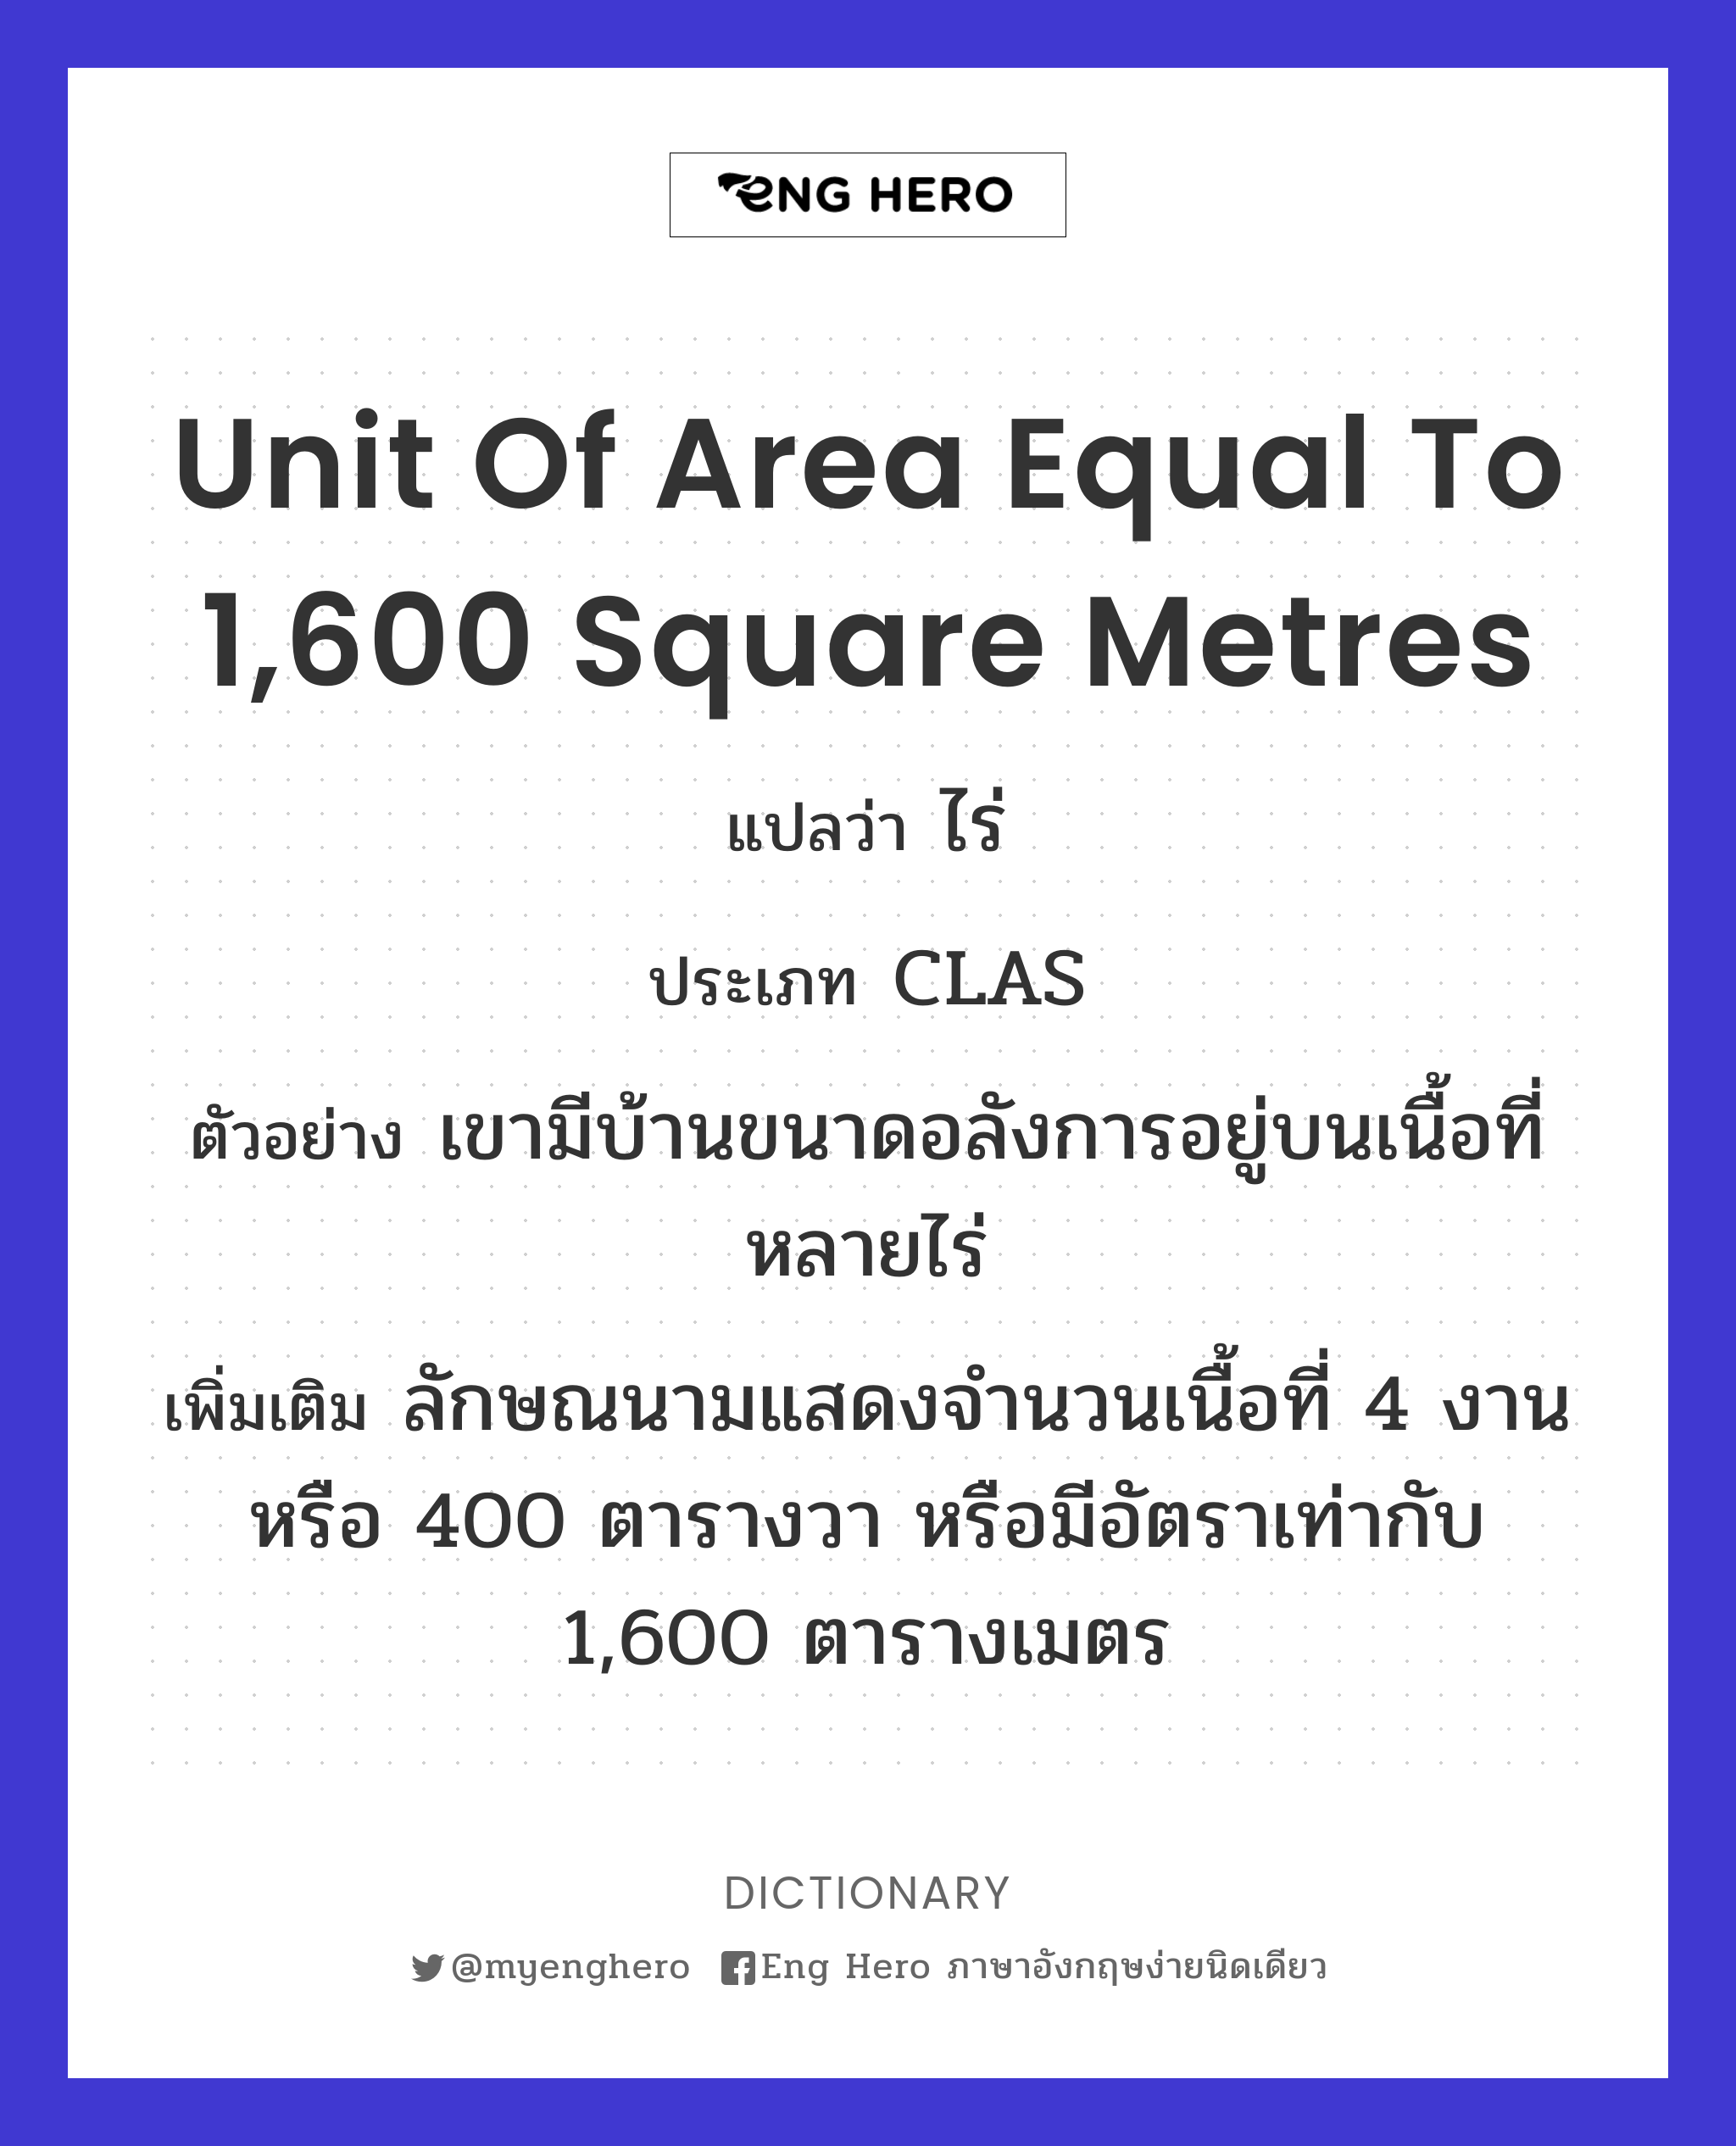 unit of area equal to 1,600 square metres